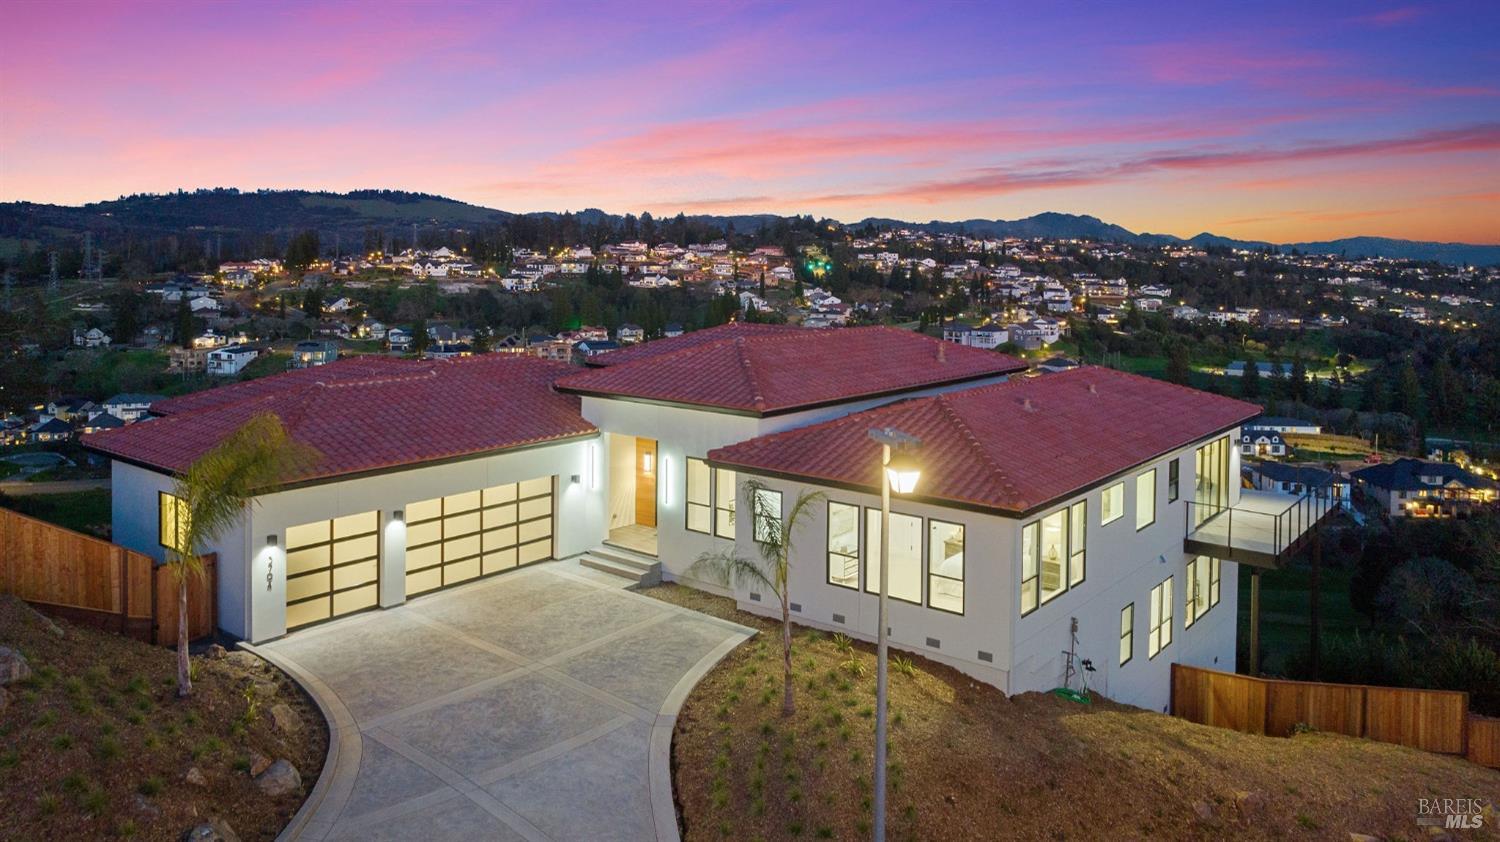 This property in Santa Rosa’s Skyfarm neighborhood is more than just a home; it's a masterpiece of modern living, offering unmatched luxury, comfort, and style. With its thoughtful design, high-end finishes, and strategic location, it stands as a symbol of architectural beauty and sophistication. Whether it's the panoramic views, the expansive living spaces, or the attention to detail in every feature, this home is a rare find for those seeking the ultimate in luxury living.